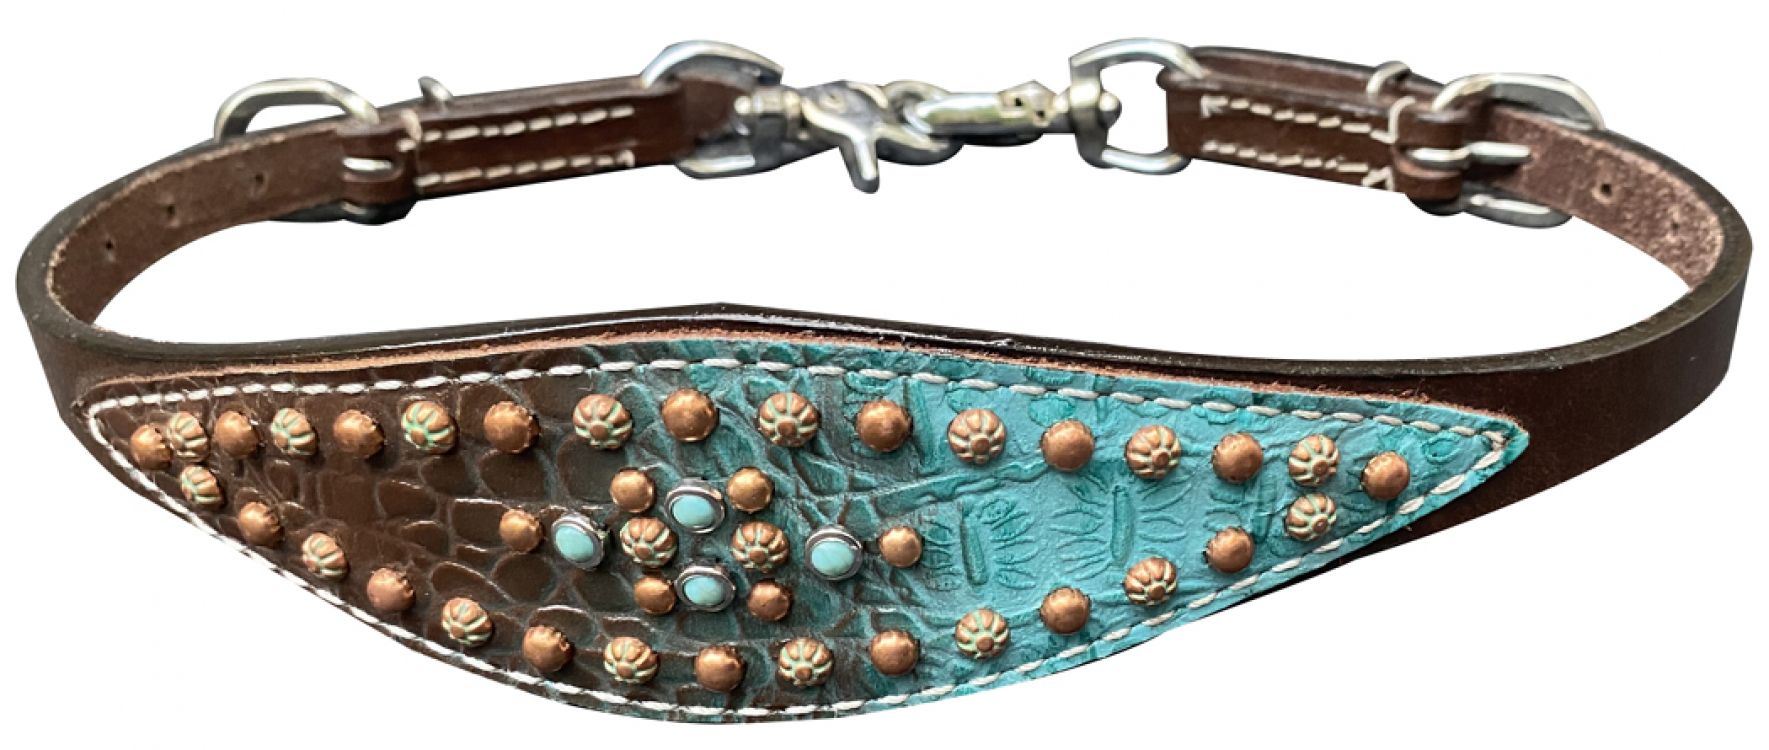 Showman ®  Teal / Chocolate brown gator print wither strap Default Shiloh   